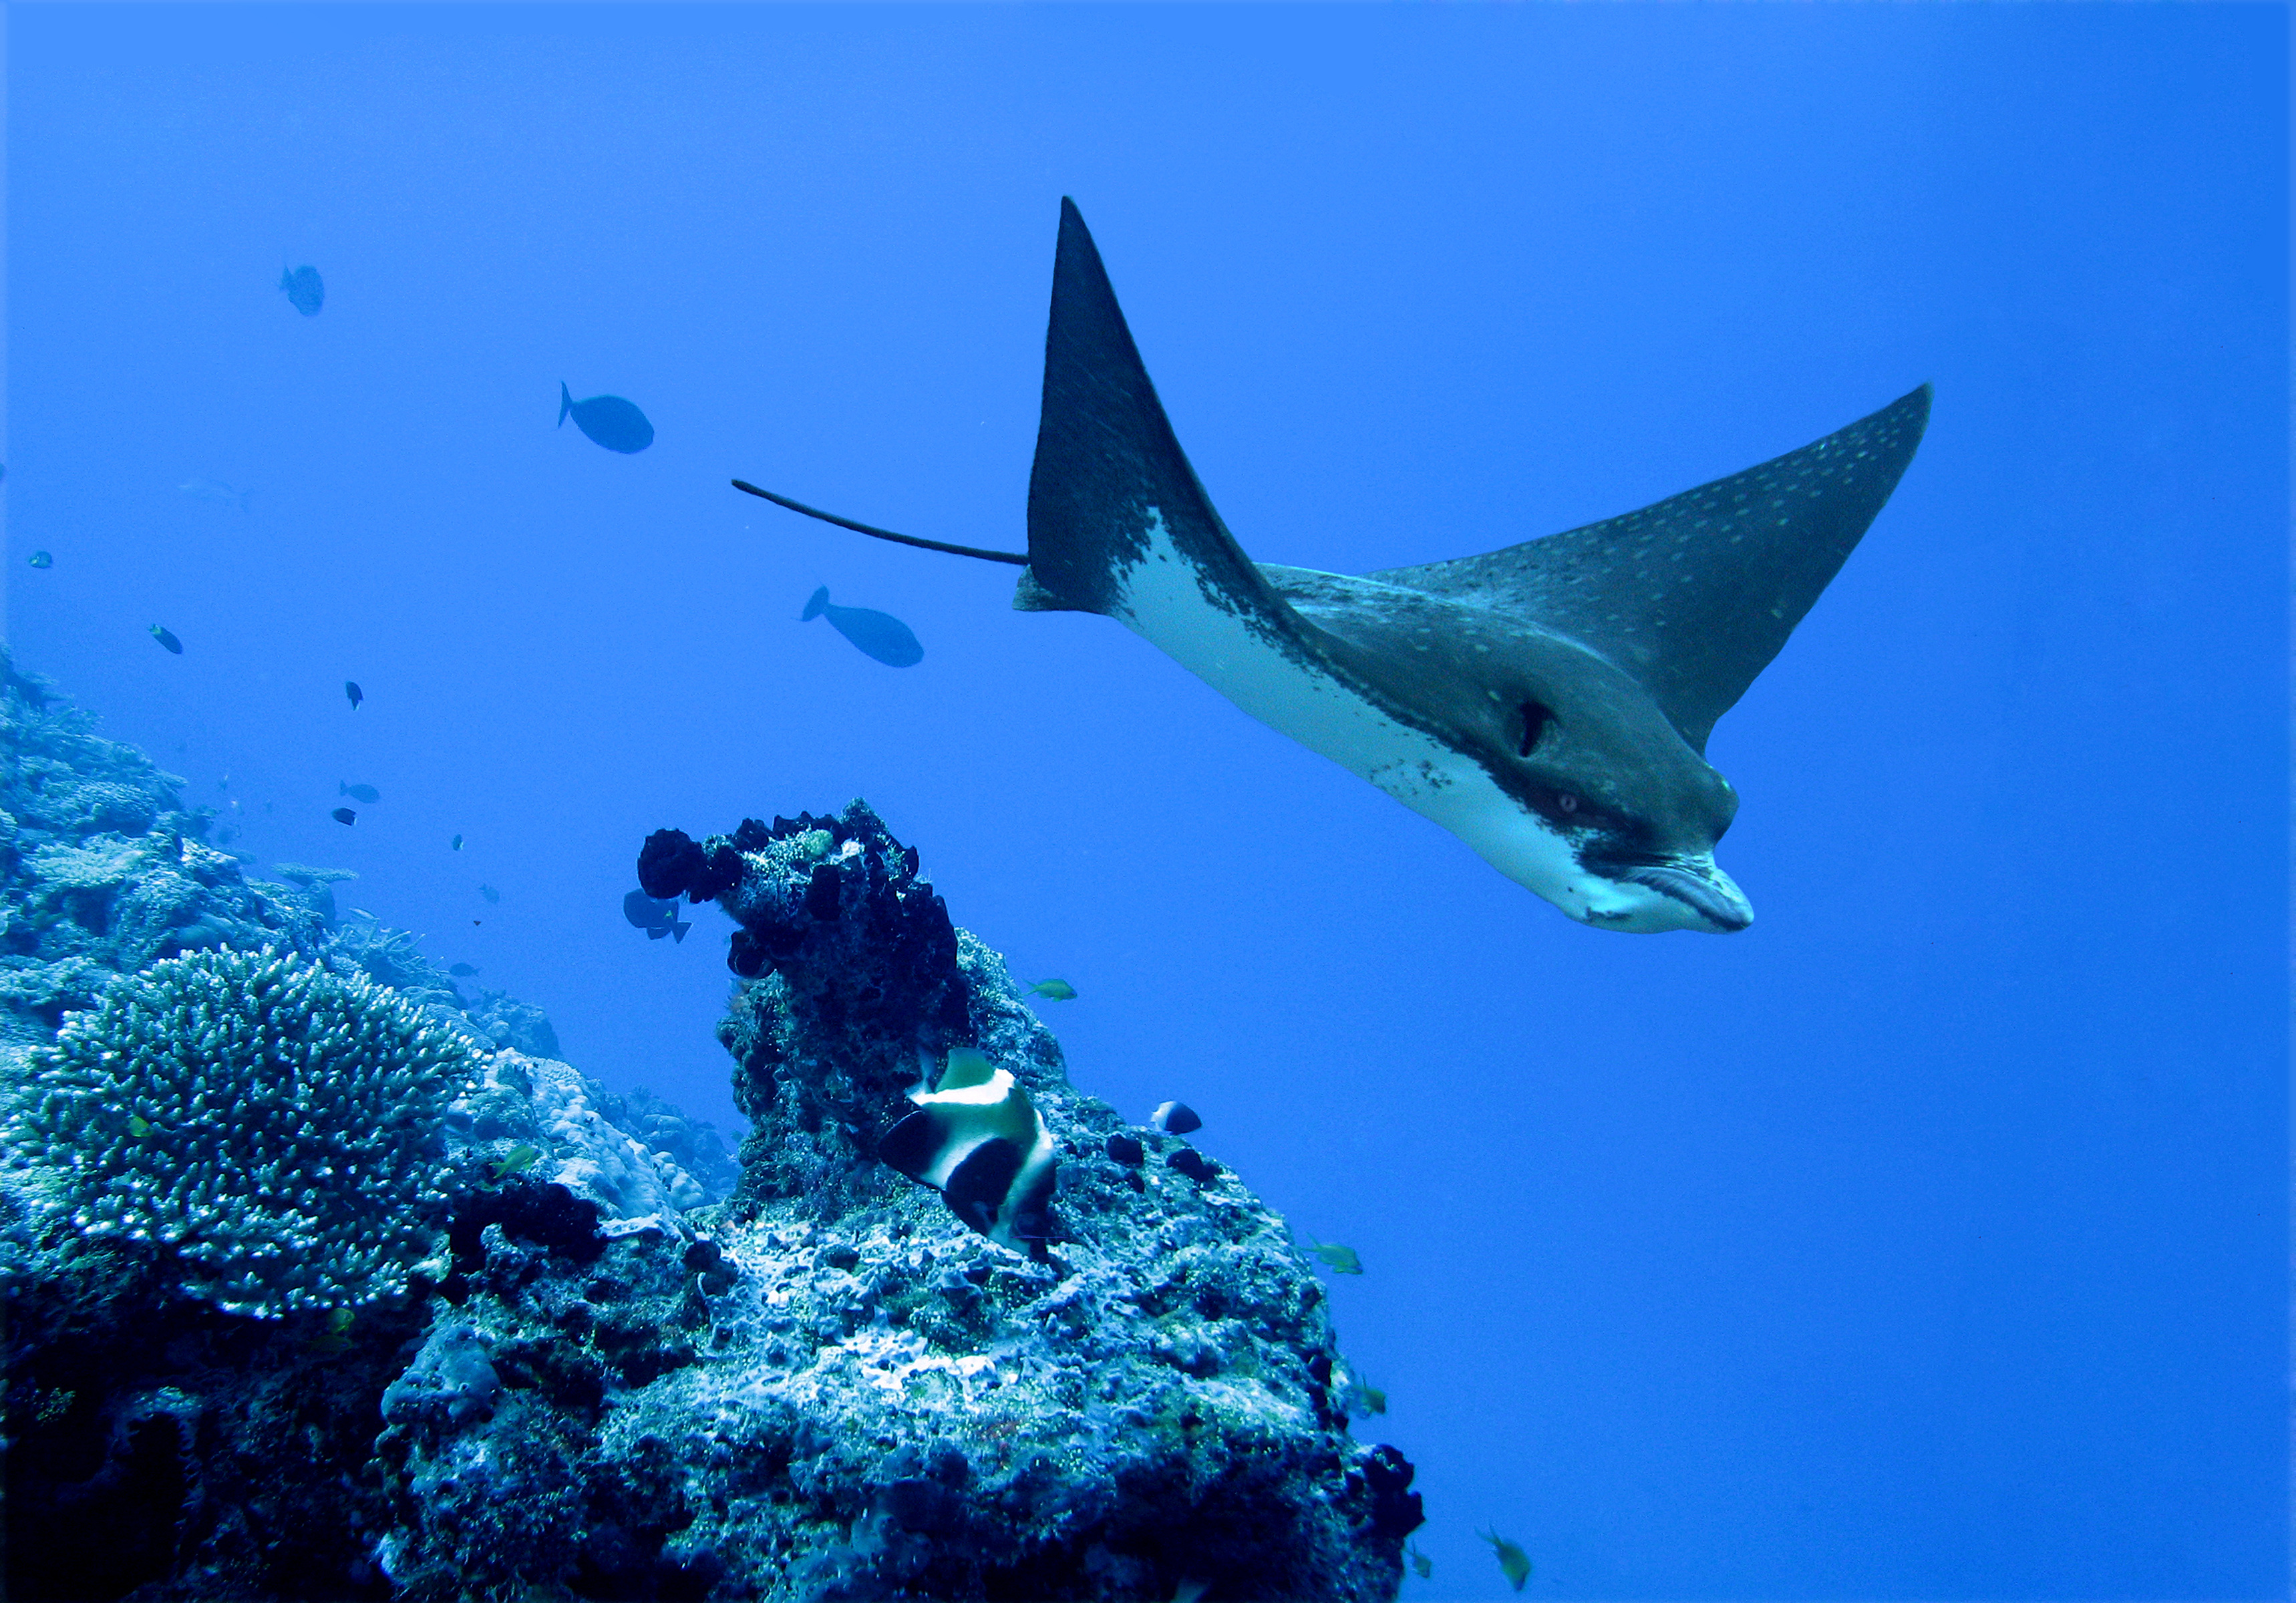 Los Sombreros dive site on Catalina Islands, Costa Rica is a favorite among manta rays as they fly through the waters enjoying the rocks and caves this site provides